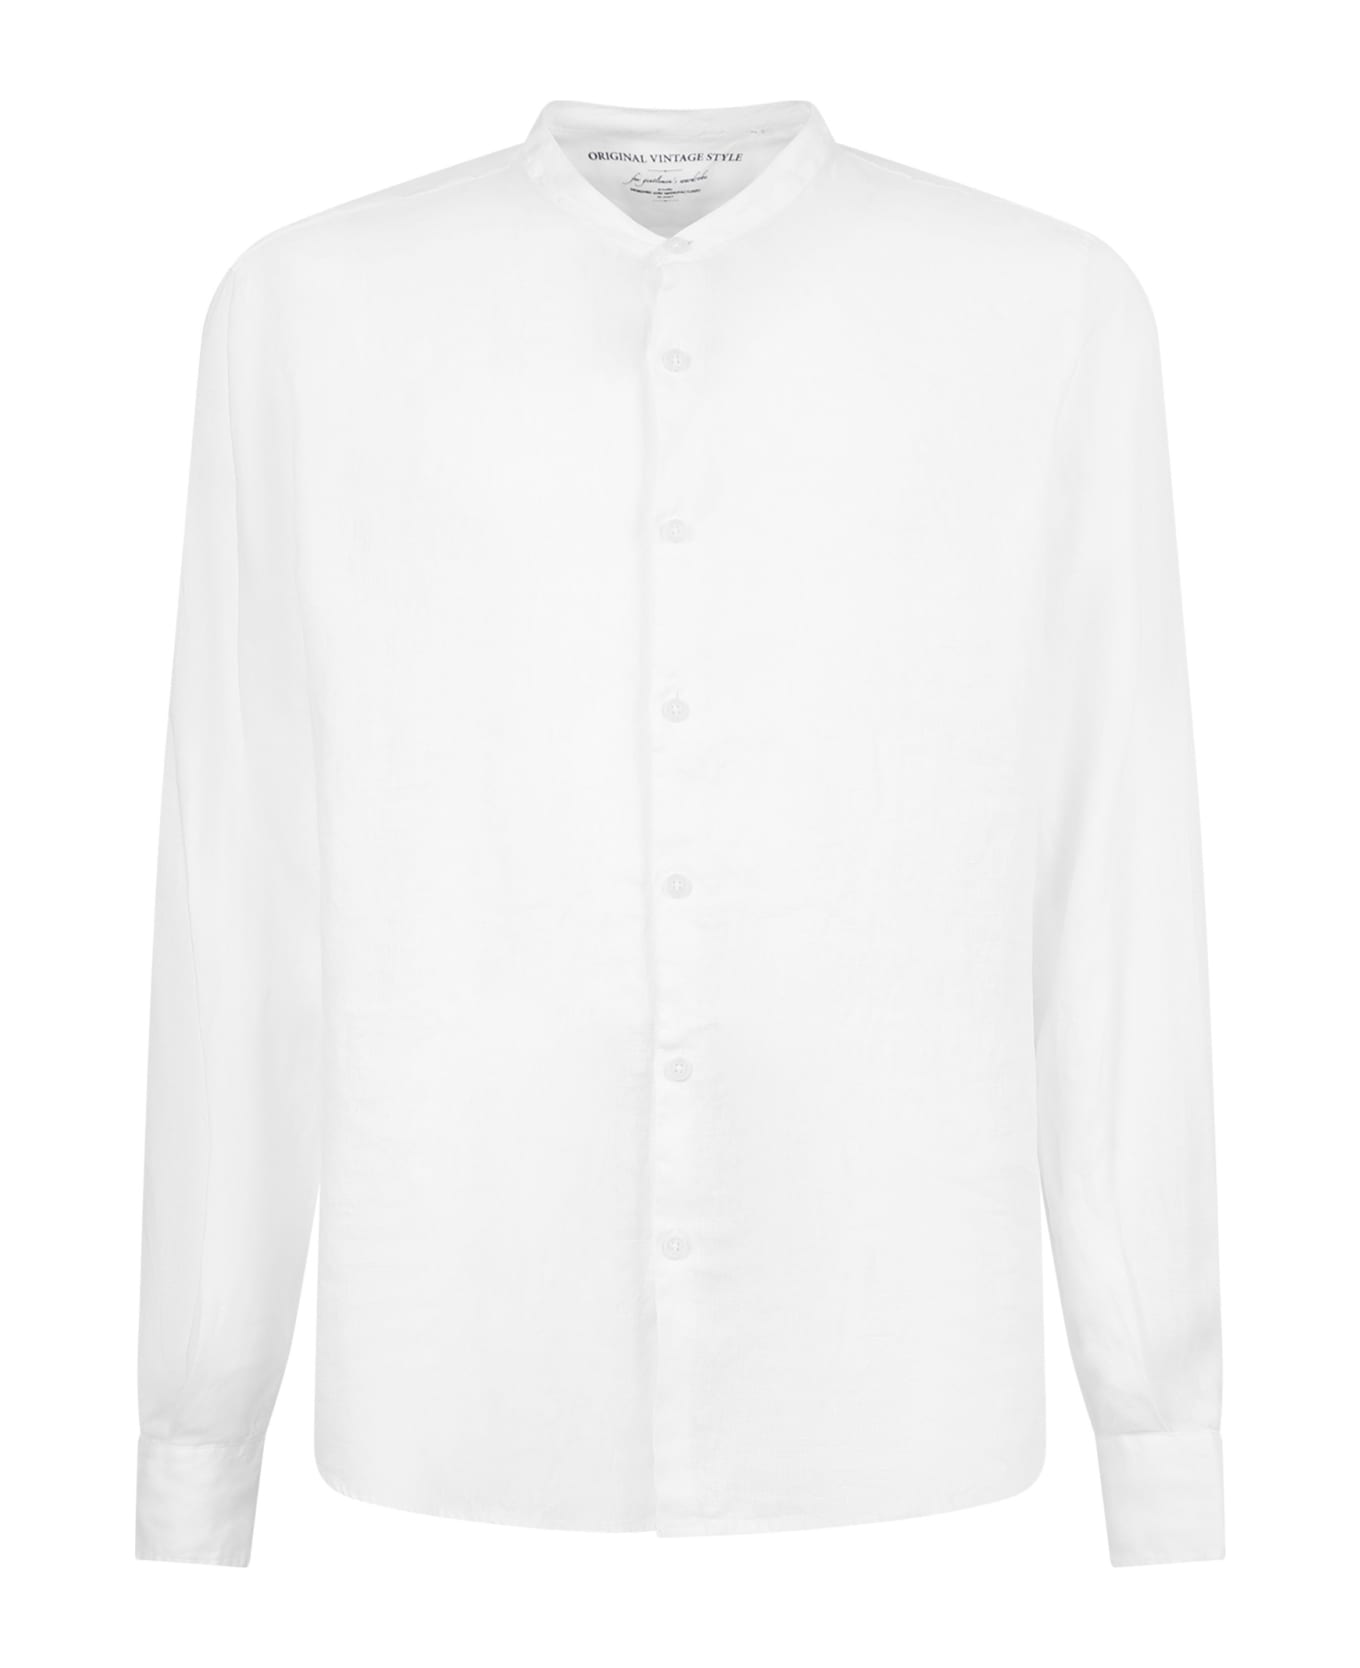 Original Vintage Style Relaxed Fit Shirt - White